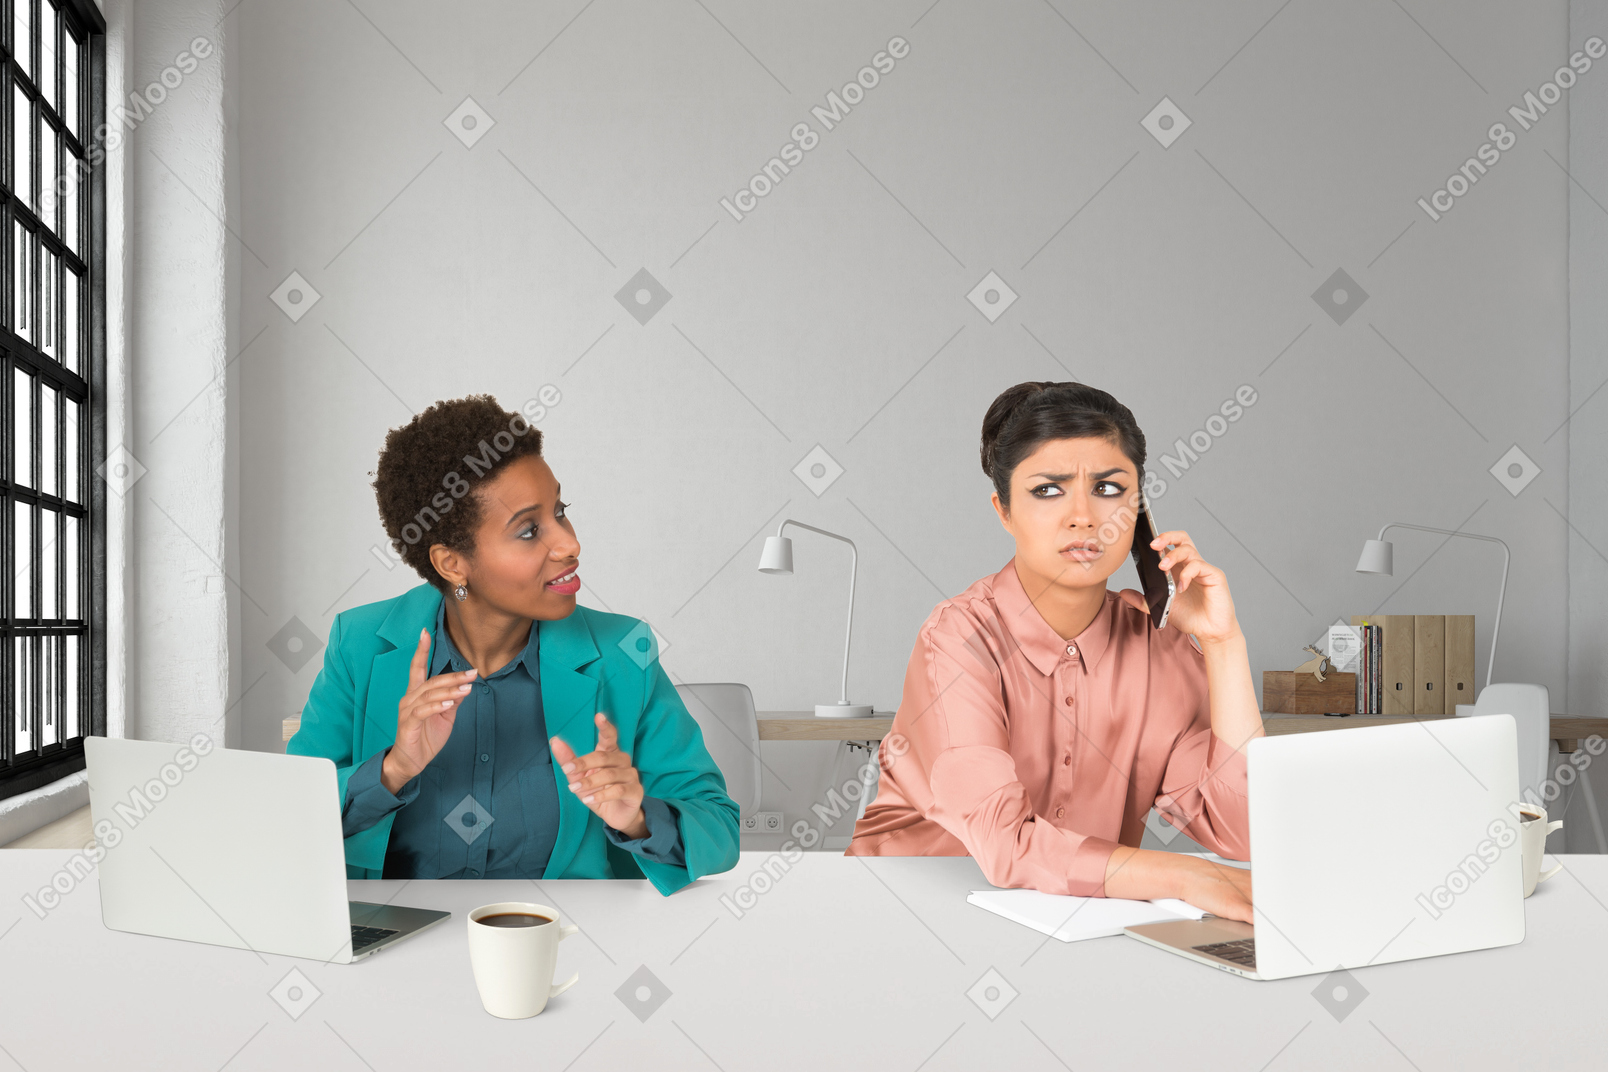 Two women sitting at a table with laptops